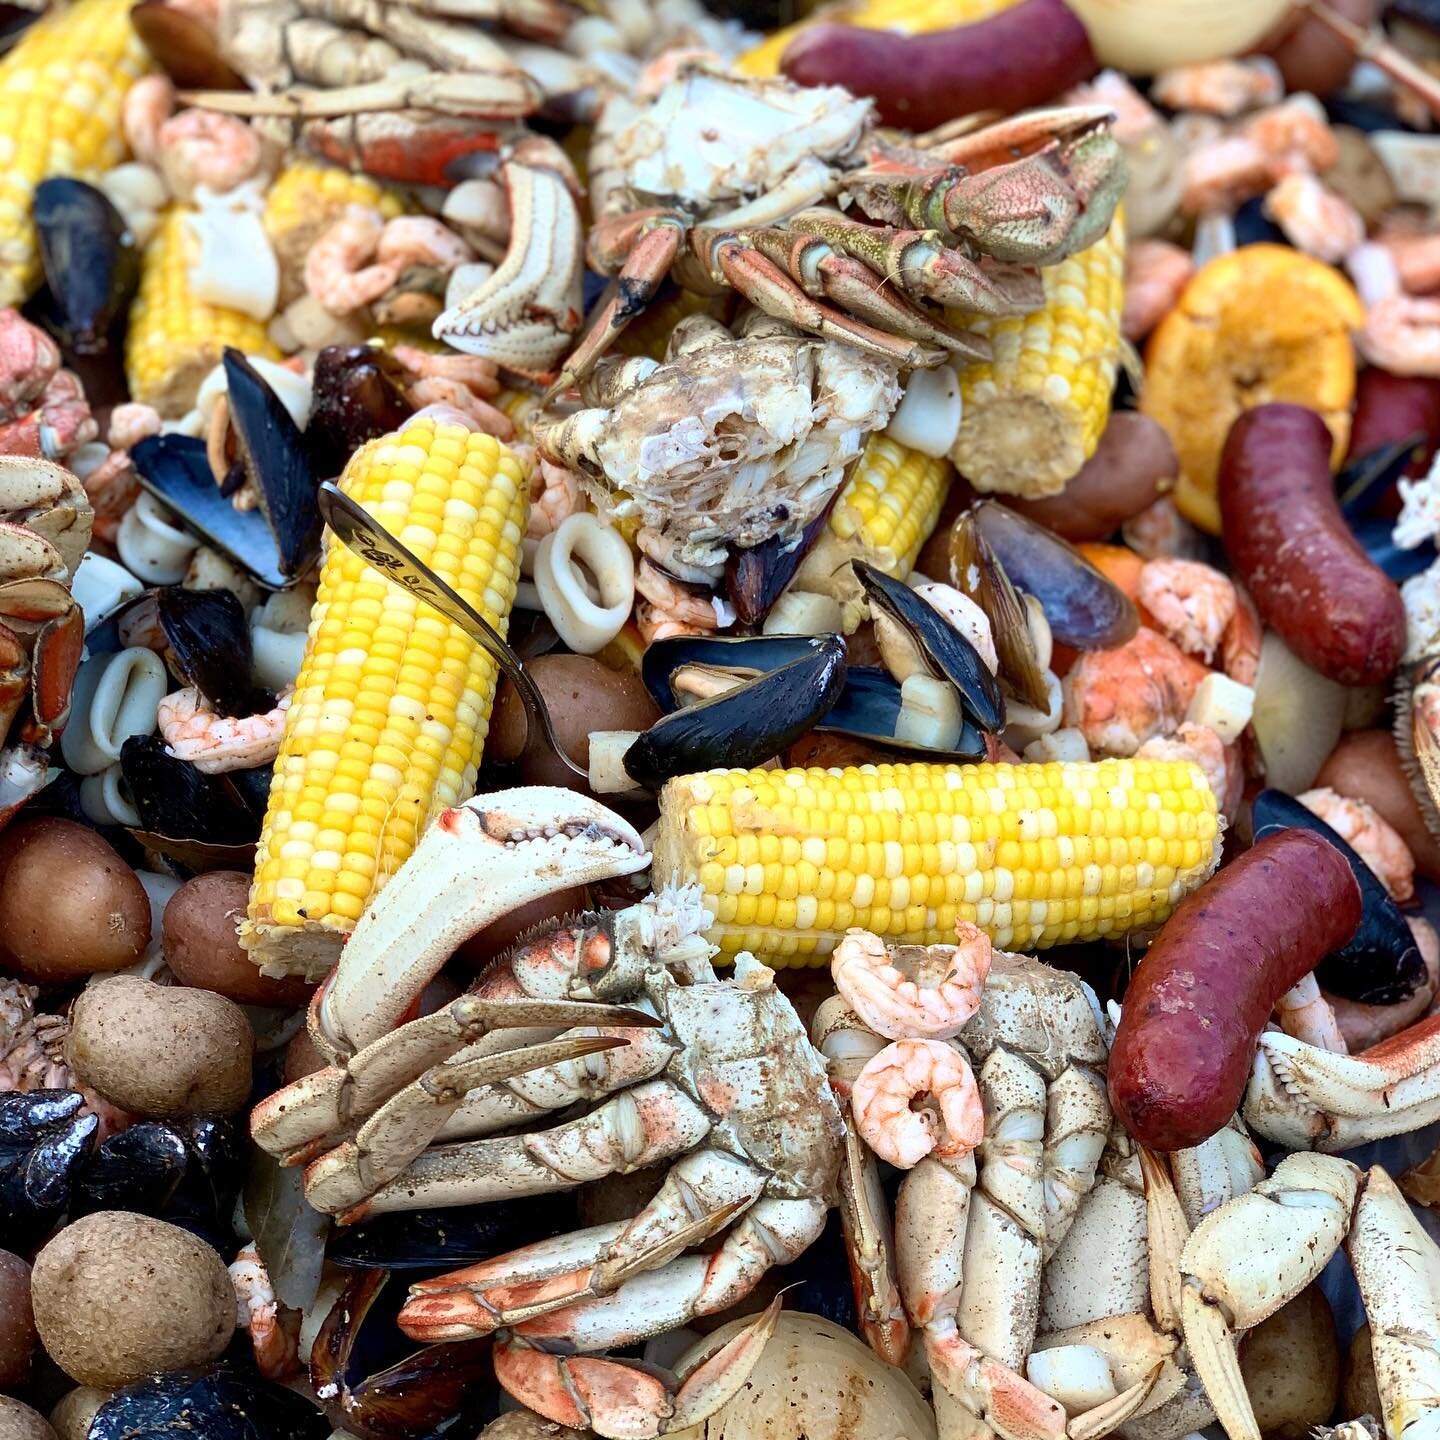 Our mom is moving to Cali, so we figured there&rsquo;s no better way to send her off than by having a seafood boil! 🦀 🌽 🦀